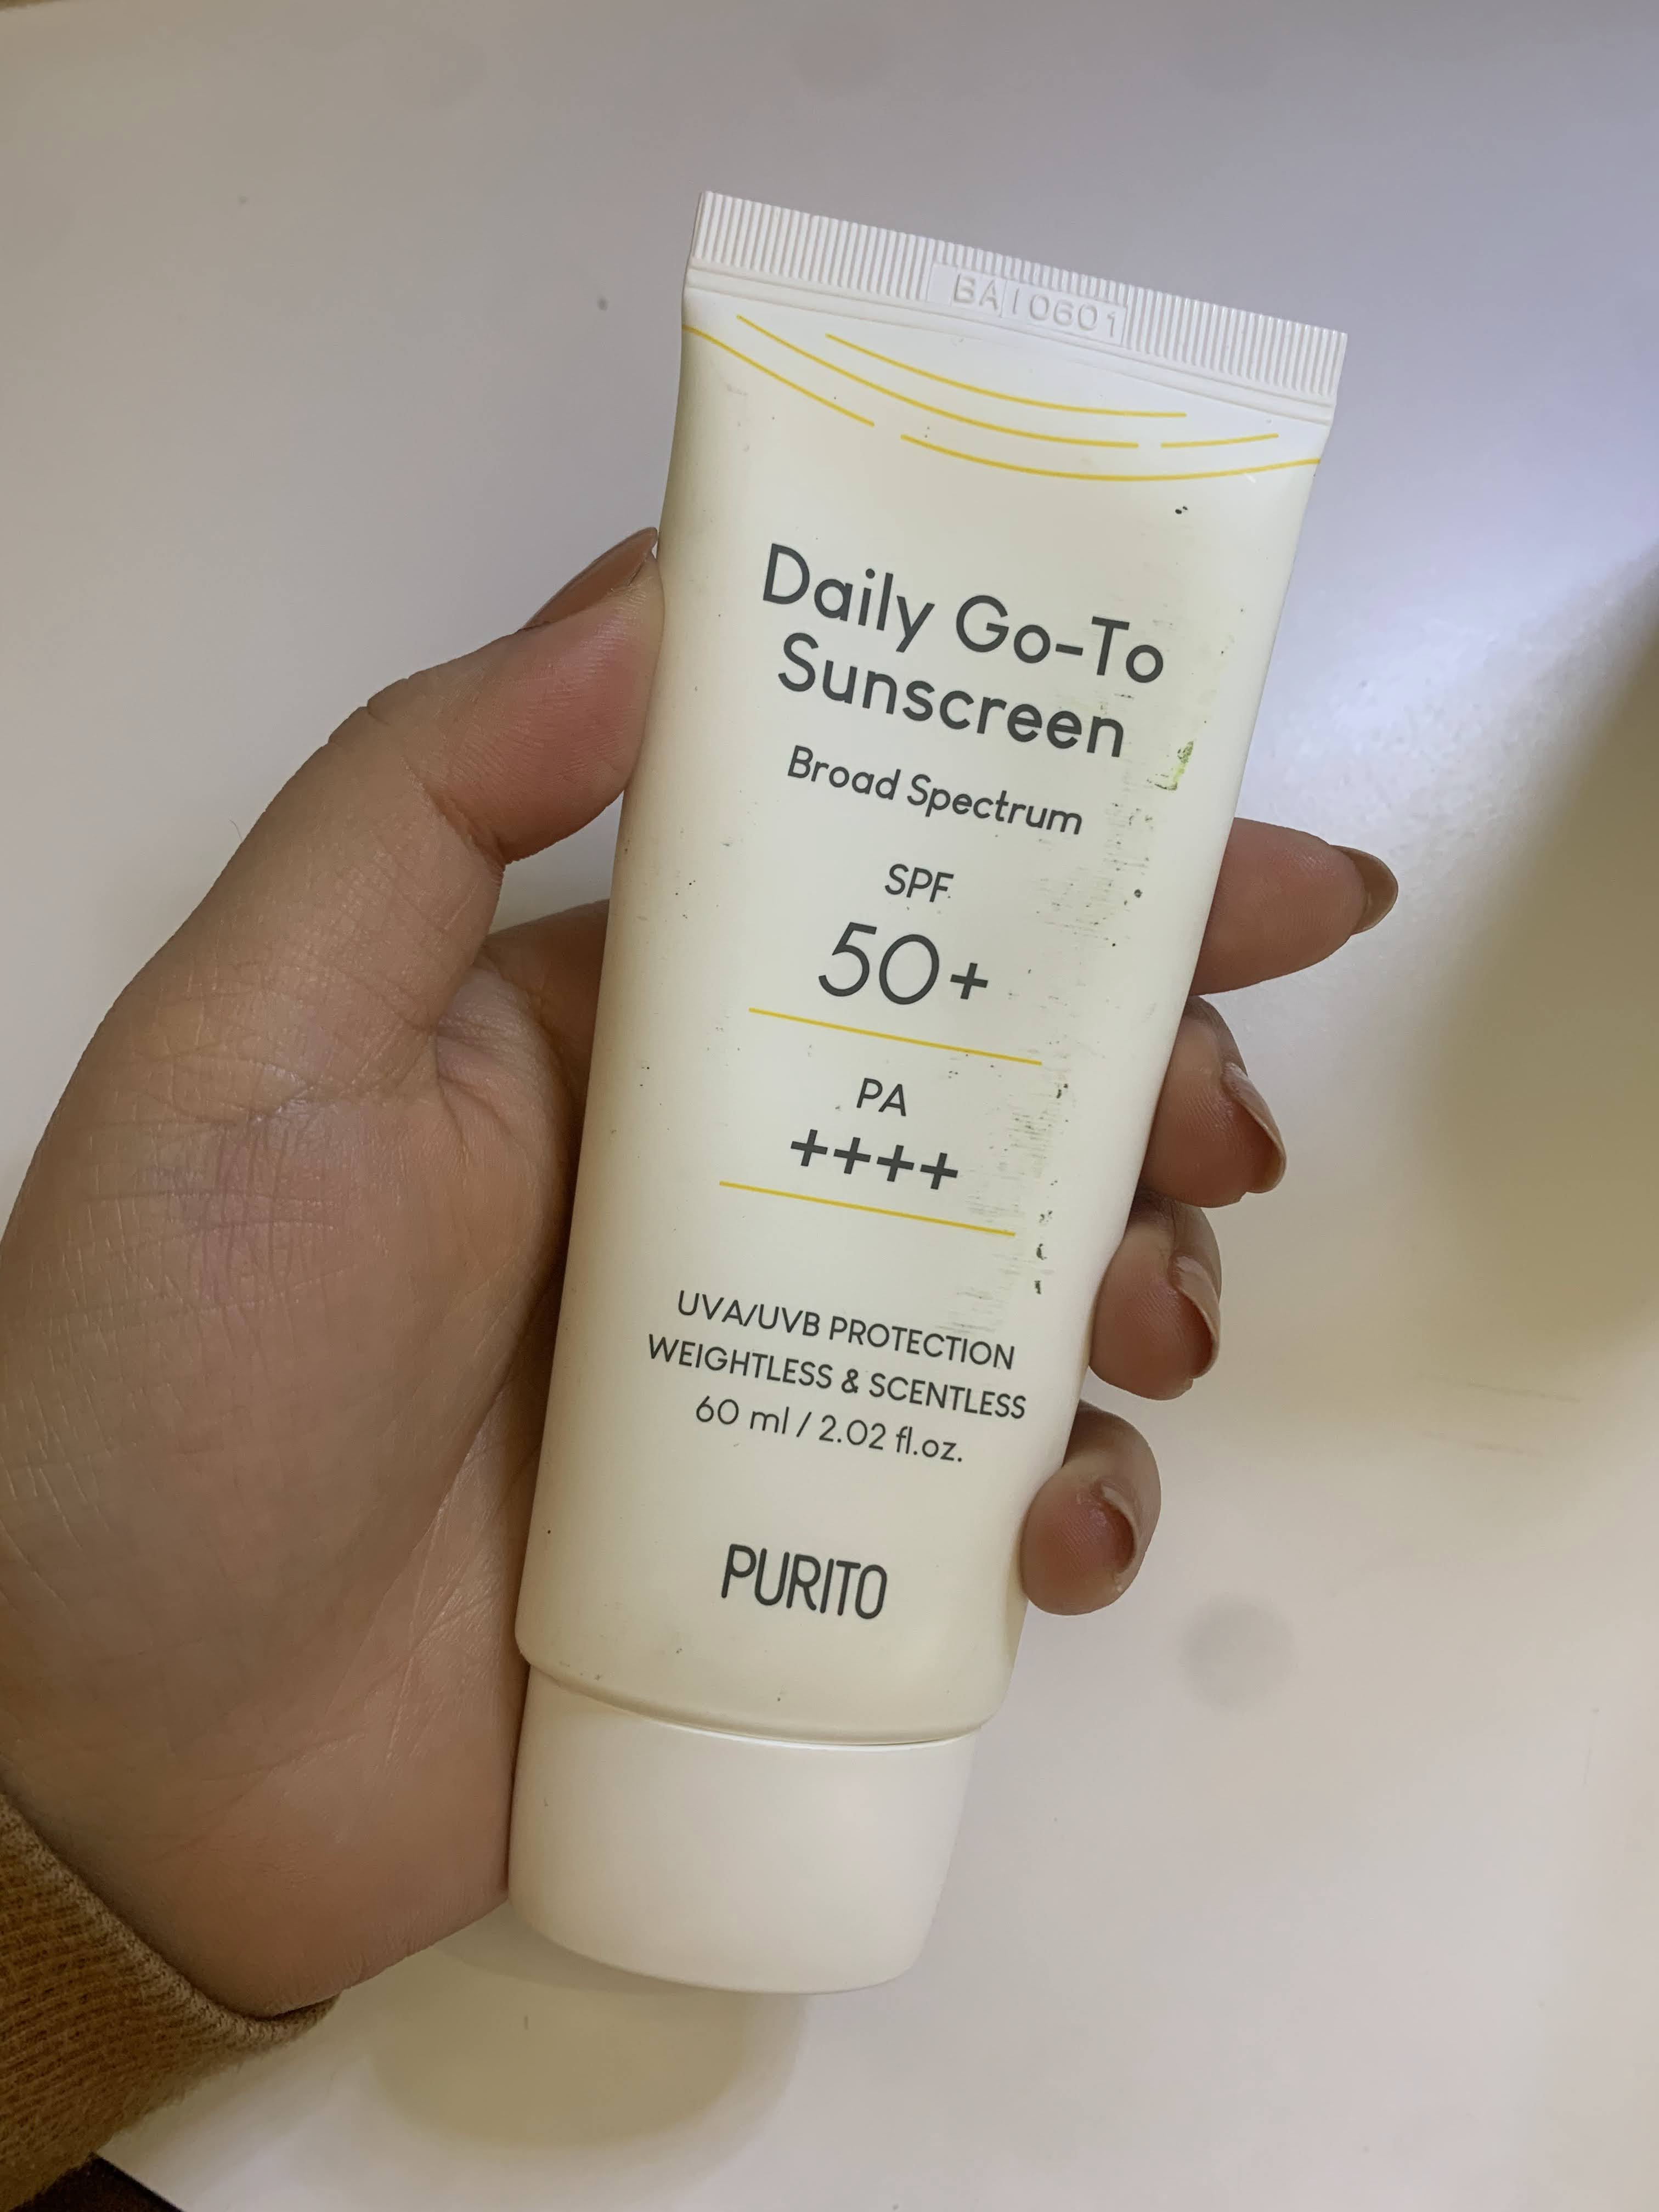 Purito Sunscreen Review From a Licensed Esthetician